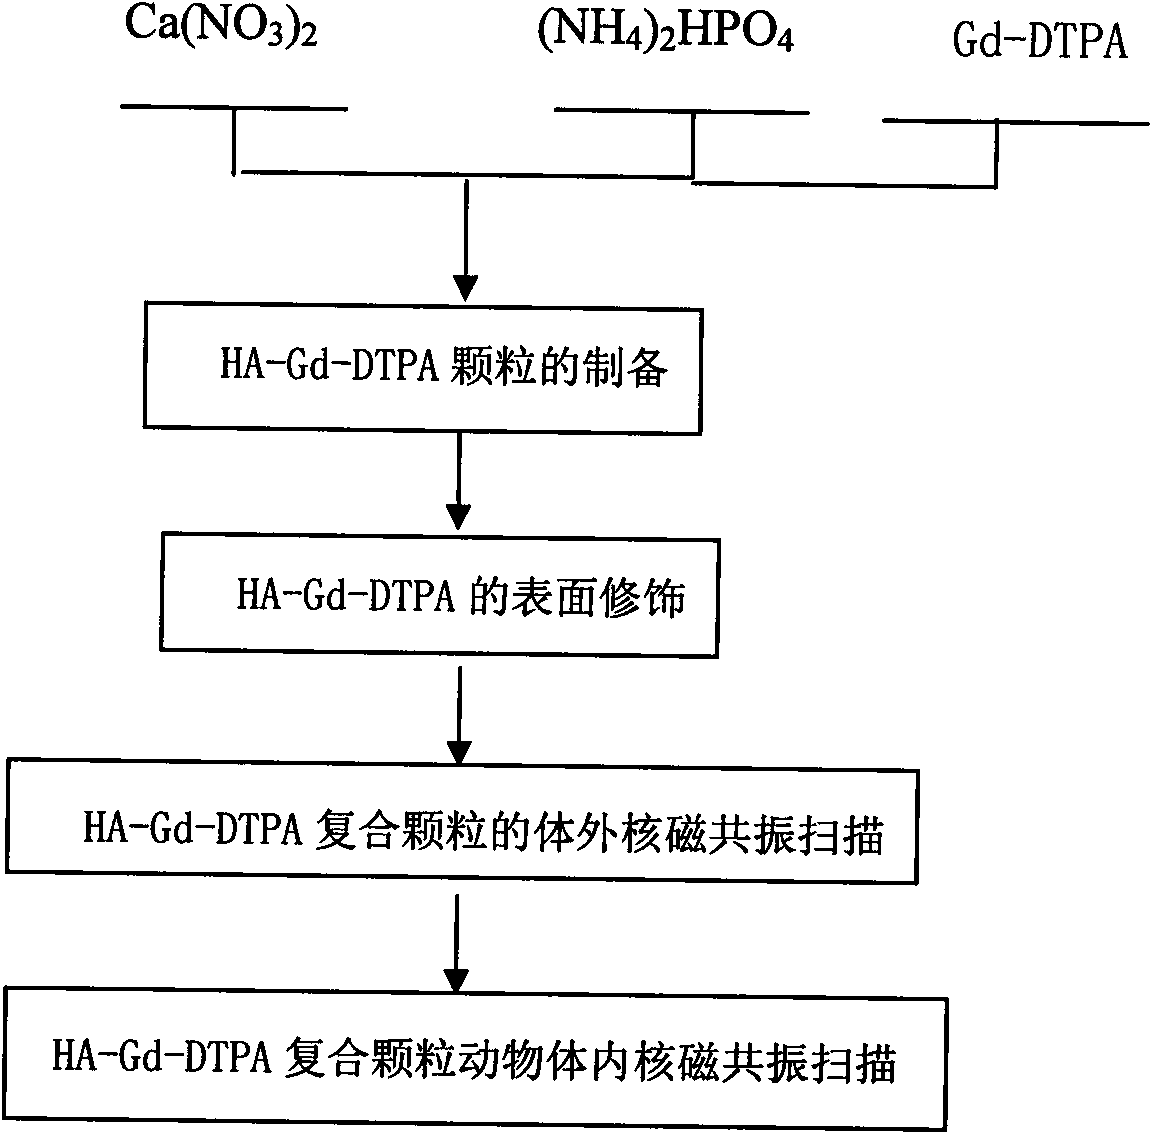 Liver, spleen specific positive magnetic nuclear resonance contrast agent and method of preparing the same